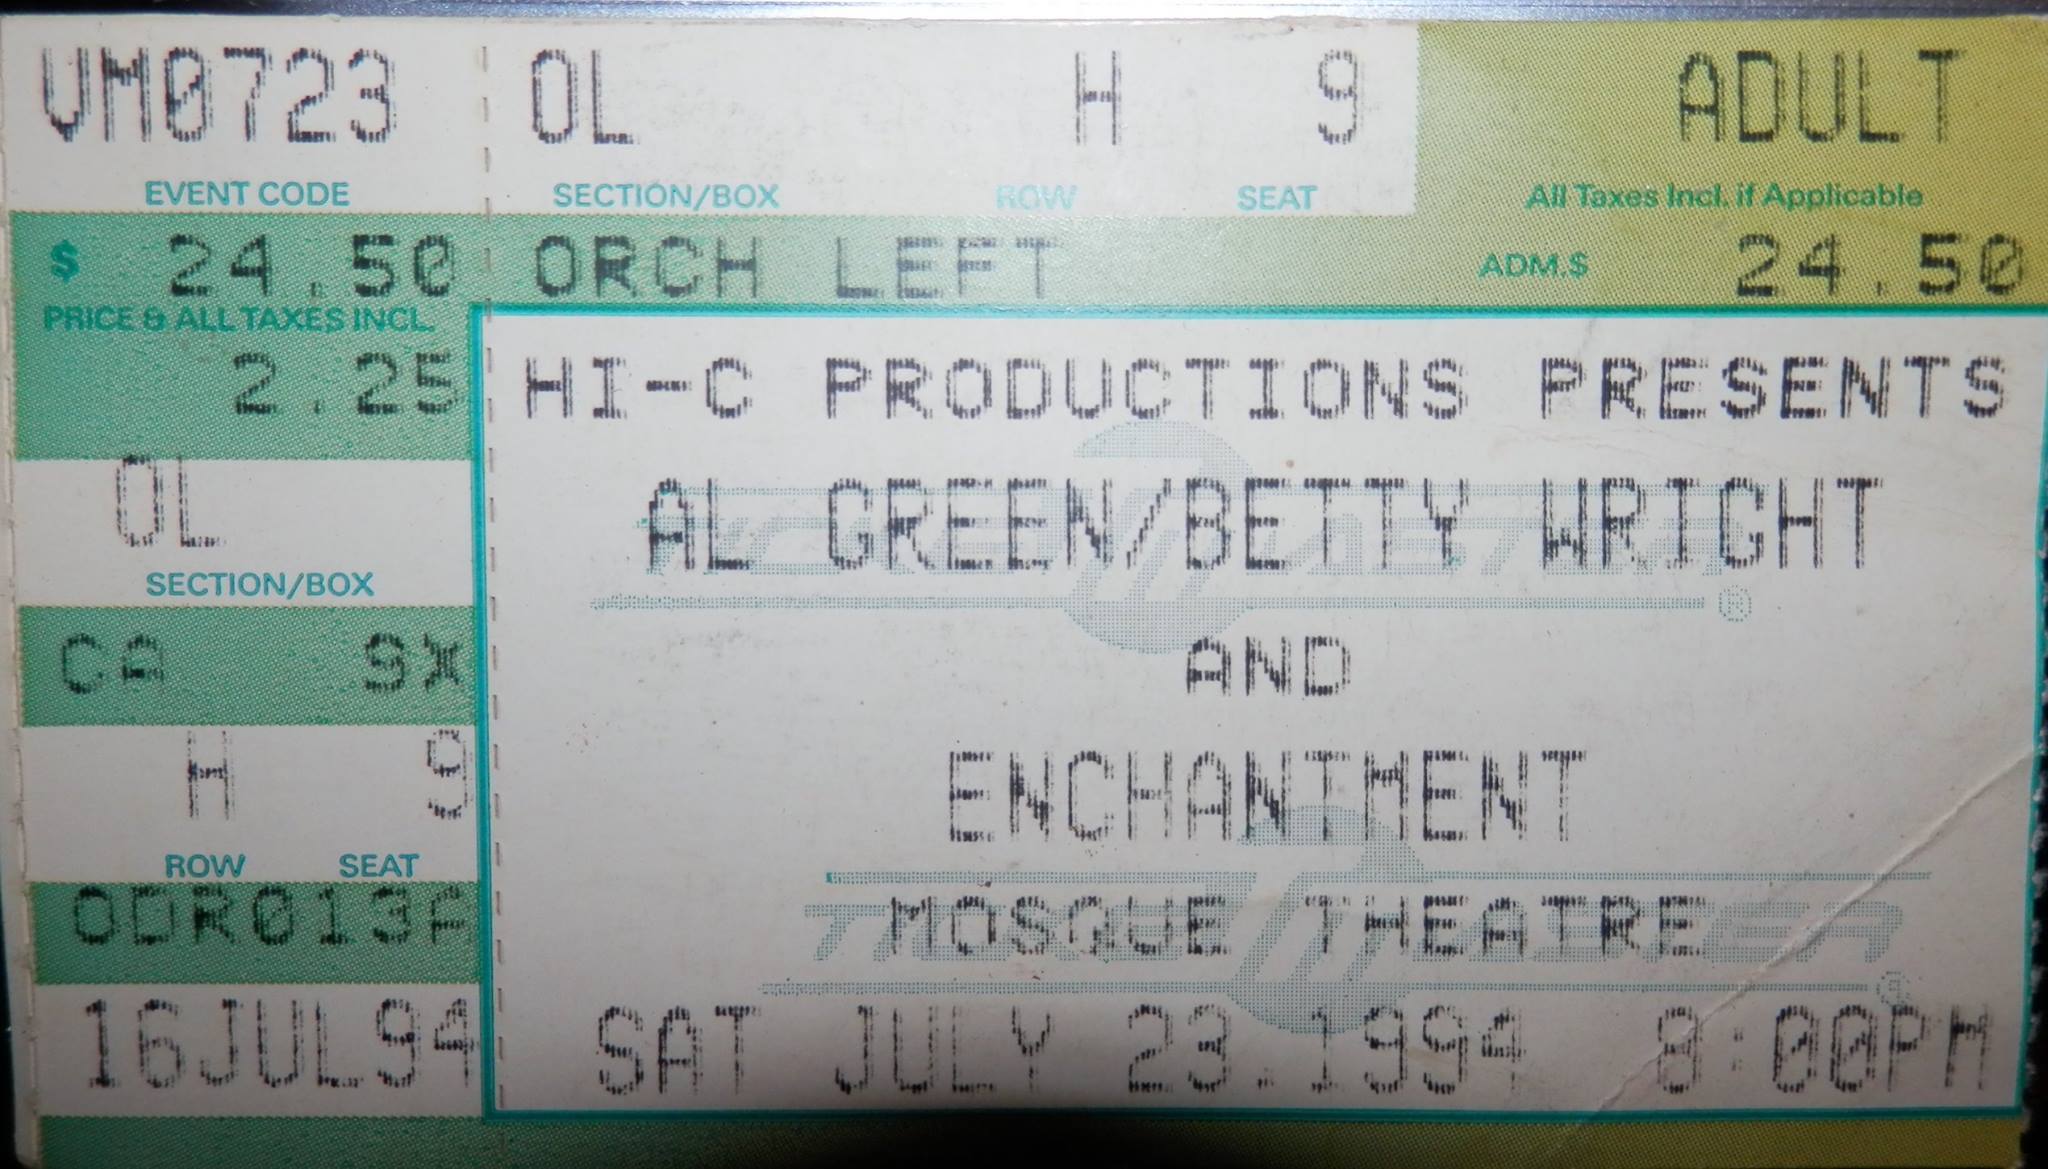 Happy birthday, Al Green! I remember this concert like it was yesterday. 